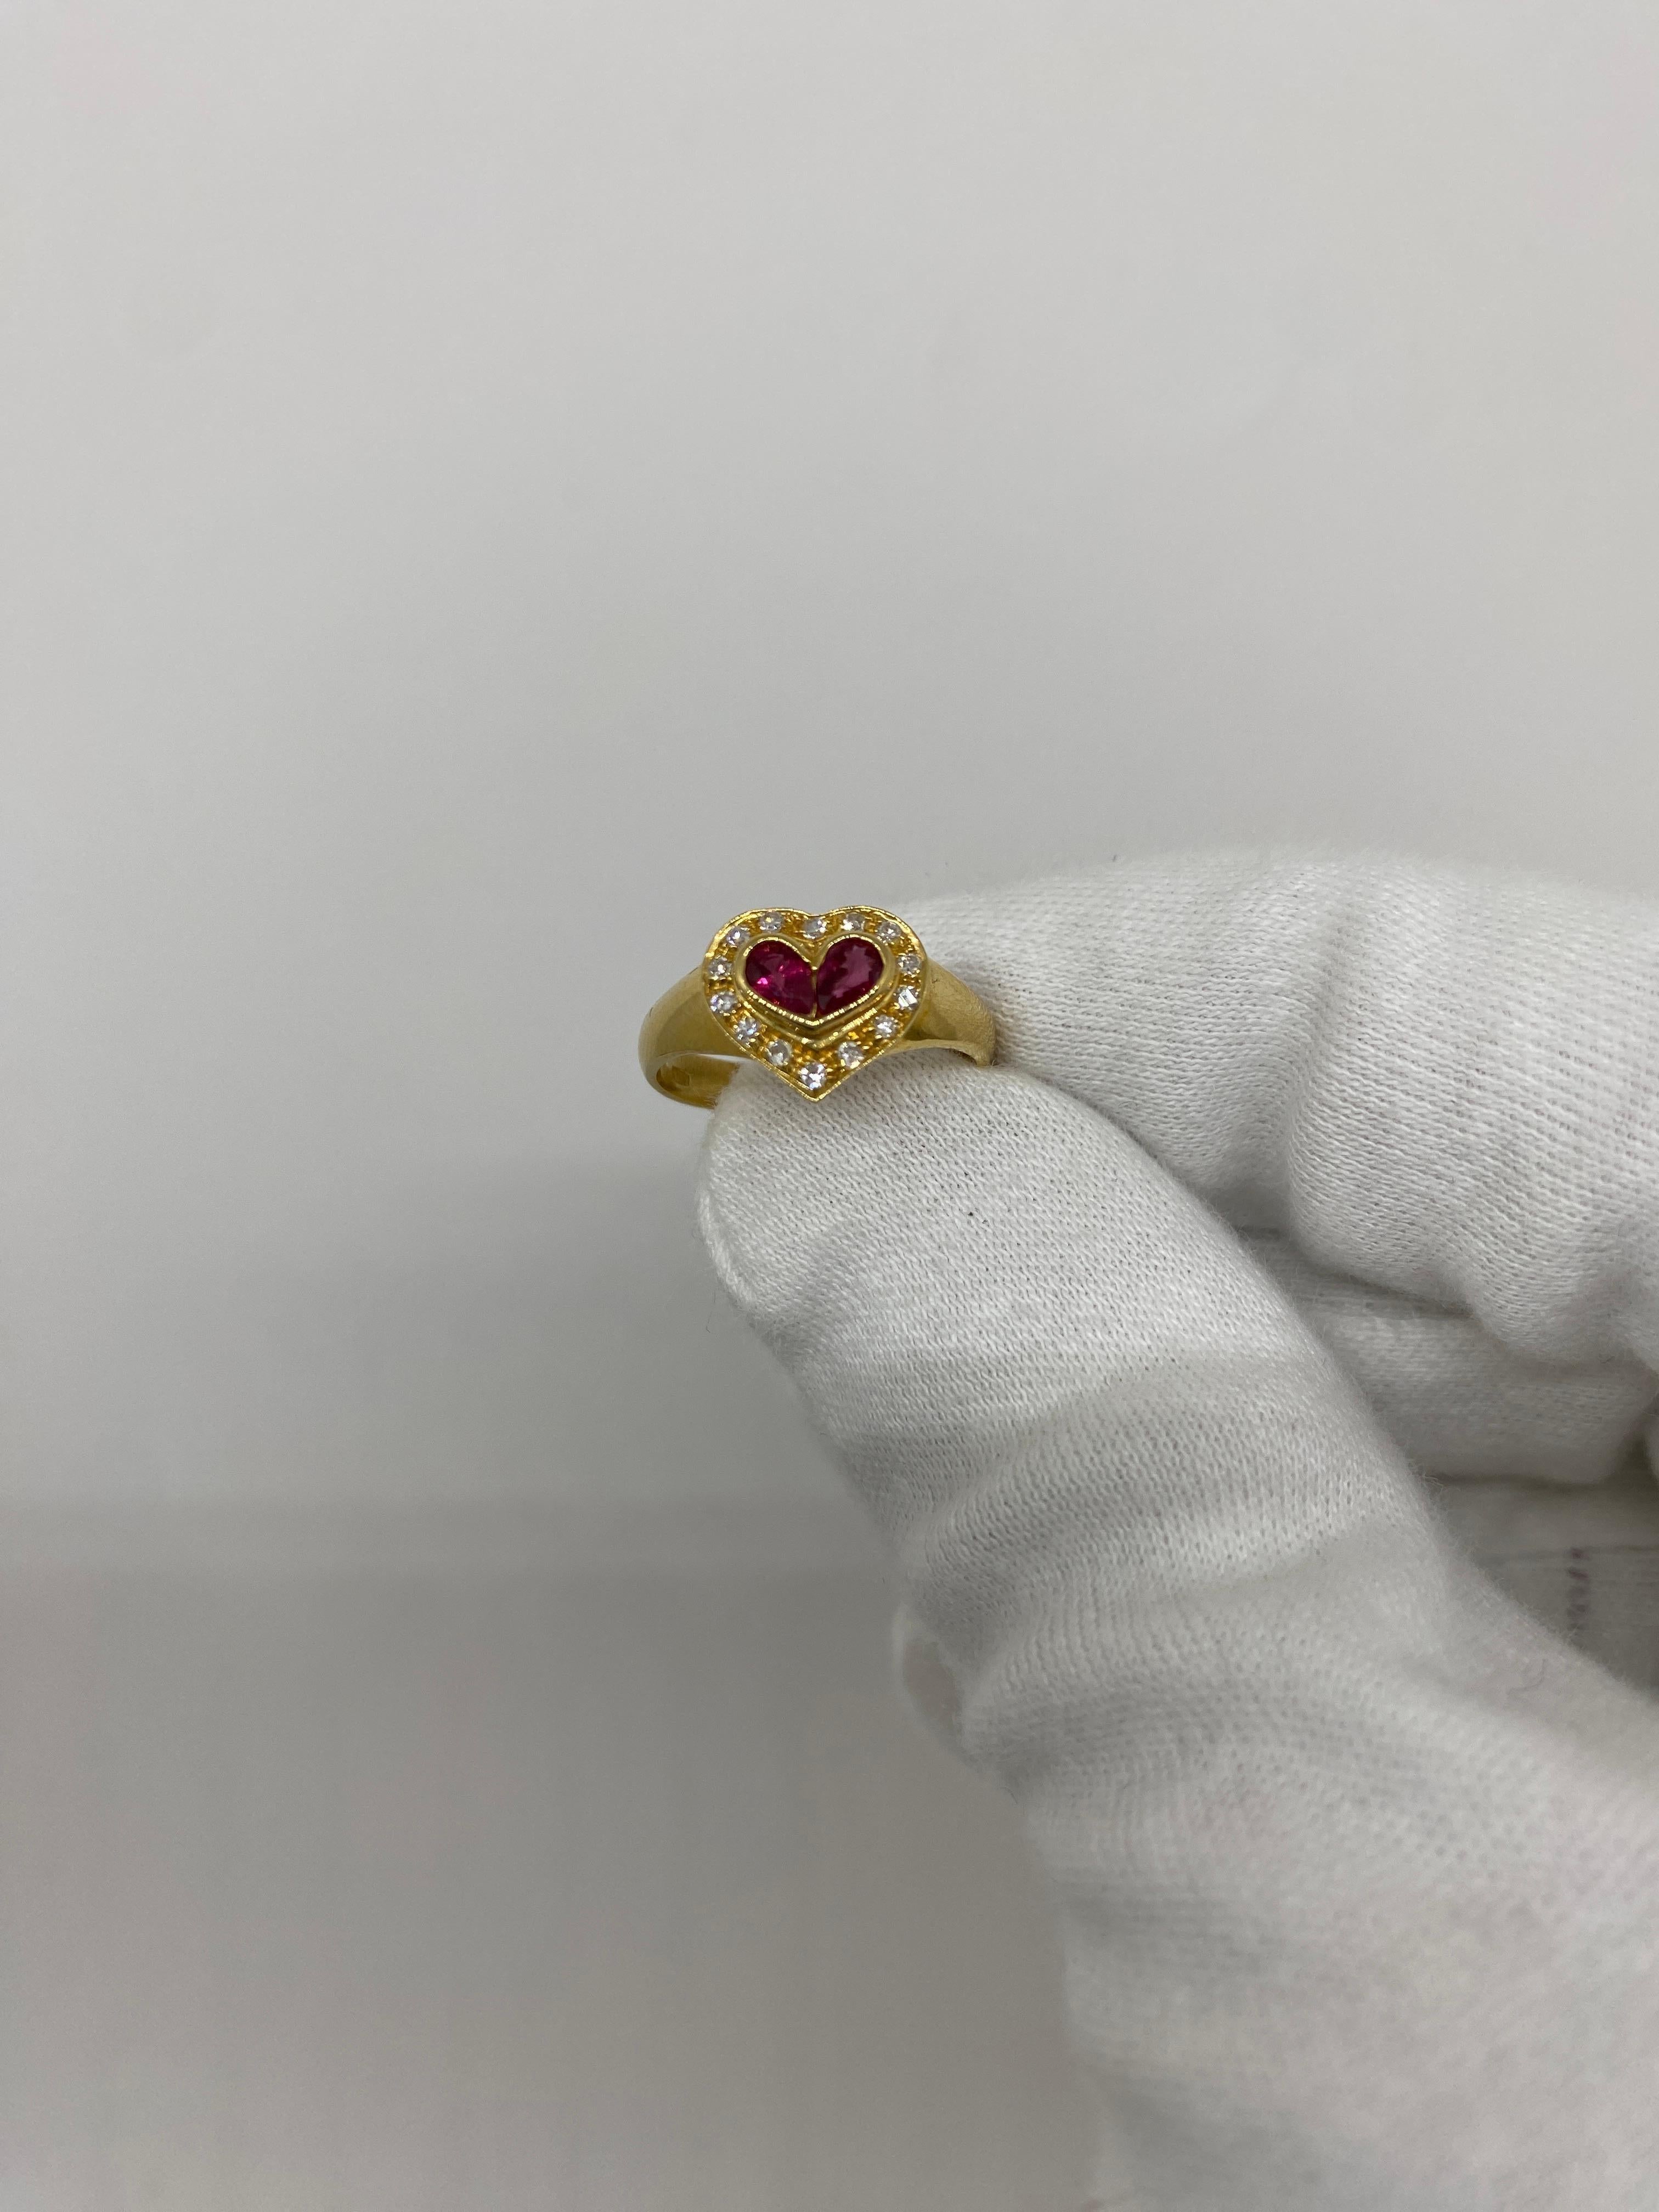 Ring made of 18kt yellow gold with pear-cut rubies and natural white brilliant-cut diamonds

Welcome to our jewelry collection, where every piece tells a story of timeless elegance and unparalleled craftsmanship. As a family-run business in Italy